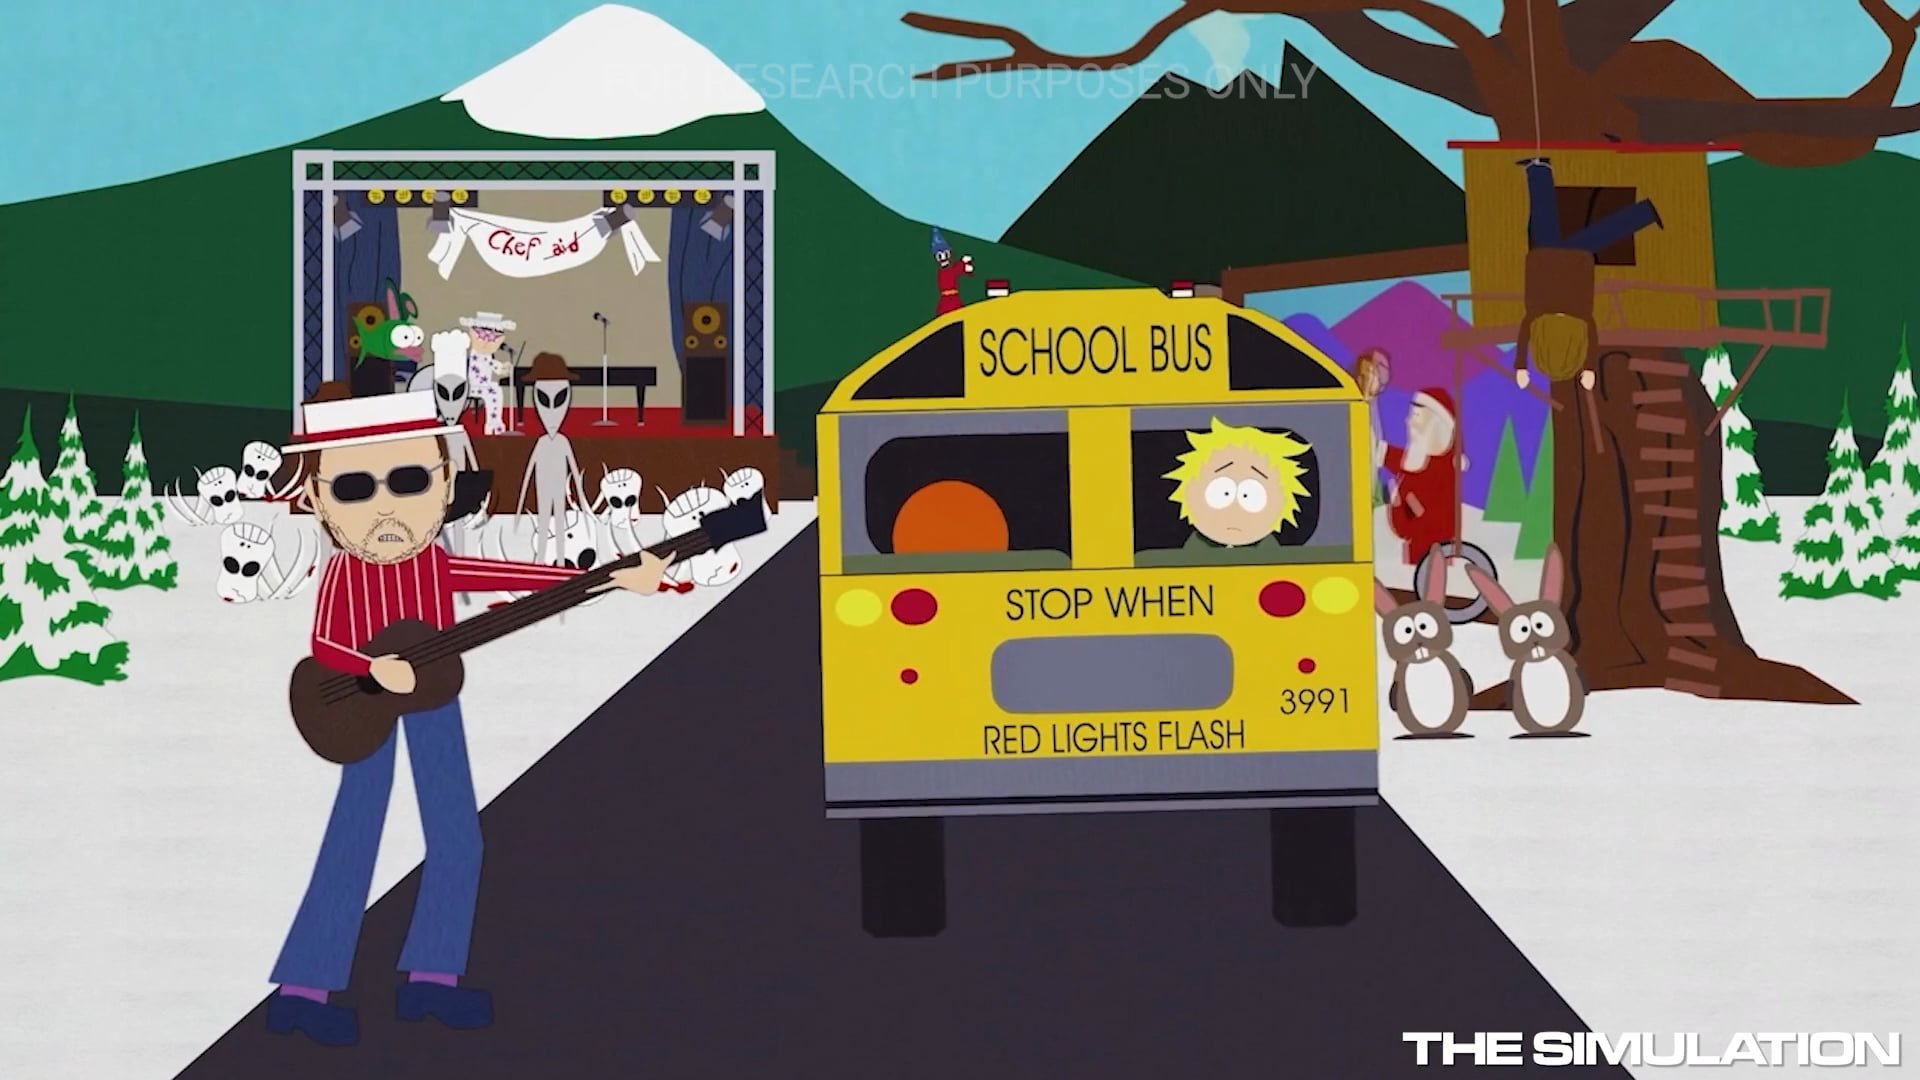 AI-generated South Park episode may be a hoax